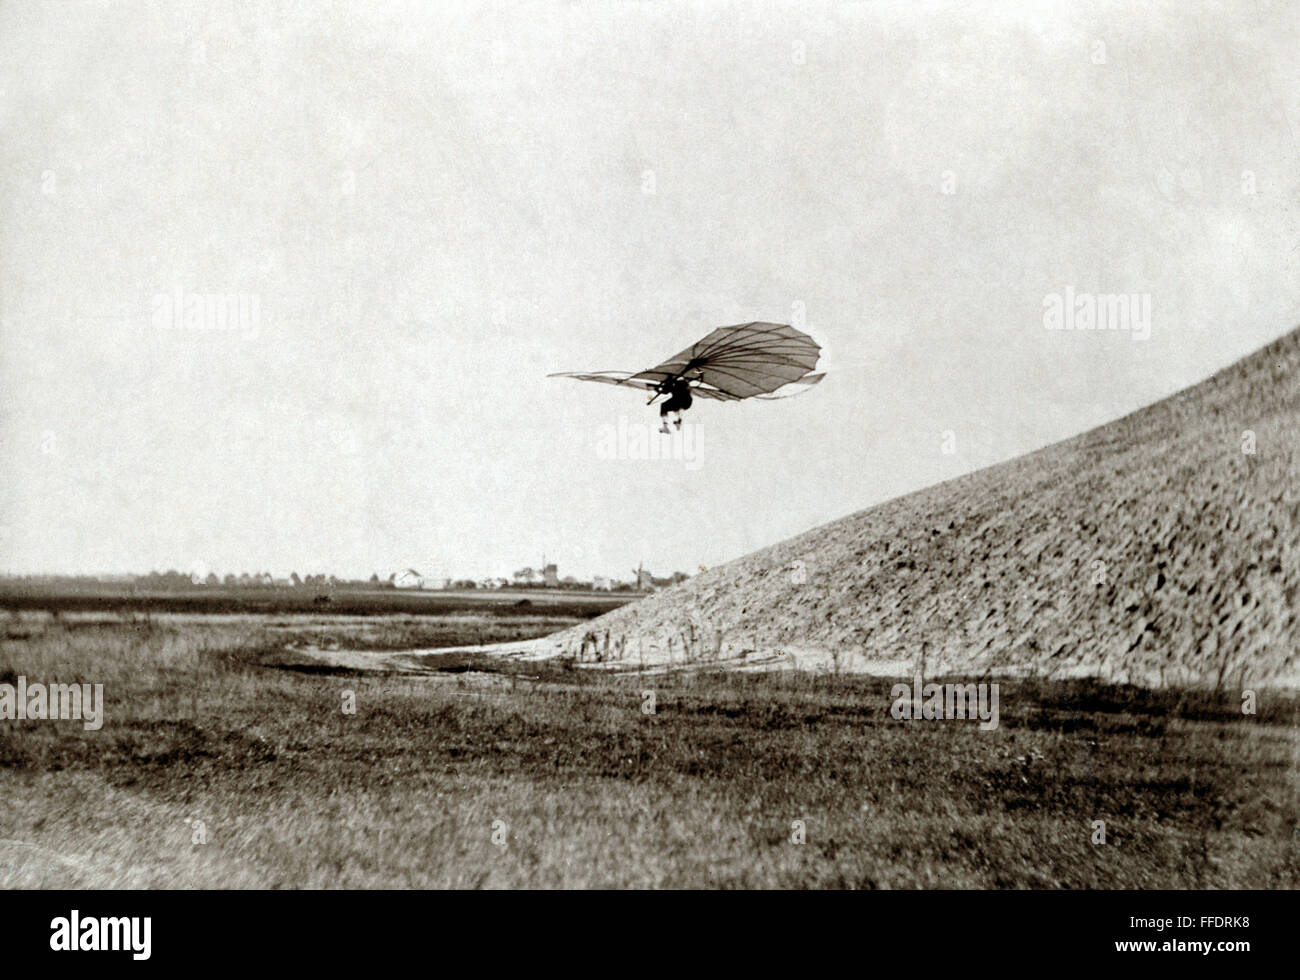 OTTO LILIENTHAL (1848-1896). /nGerman aeronautical engineer. One of Otto Lilenthal's early glider flights. Photograph, c1895. Stock Photo